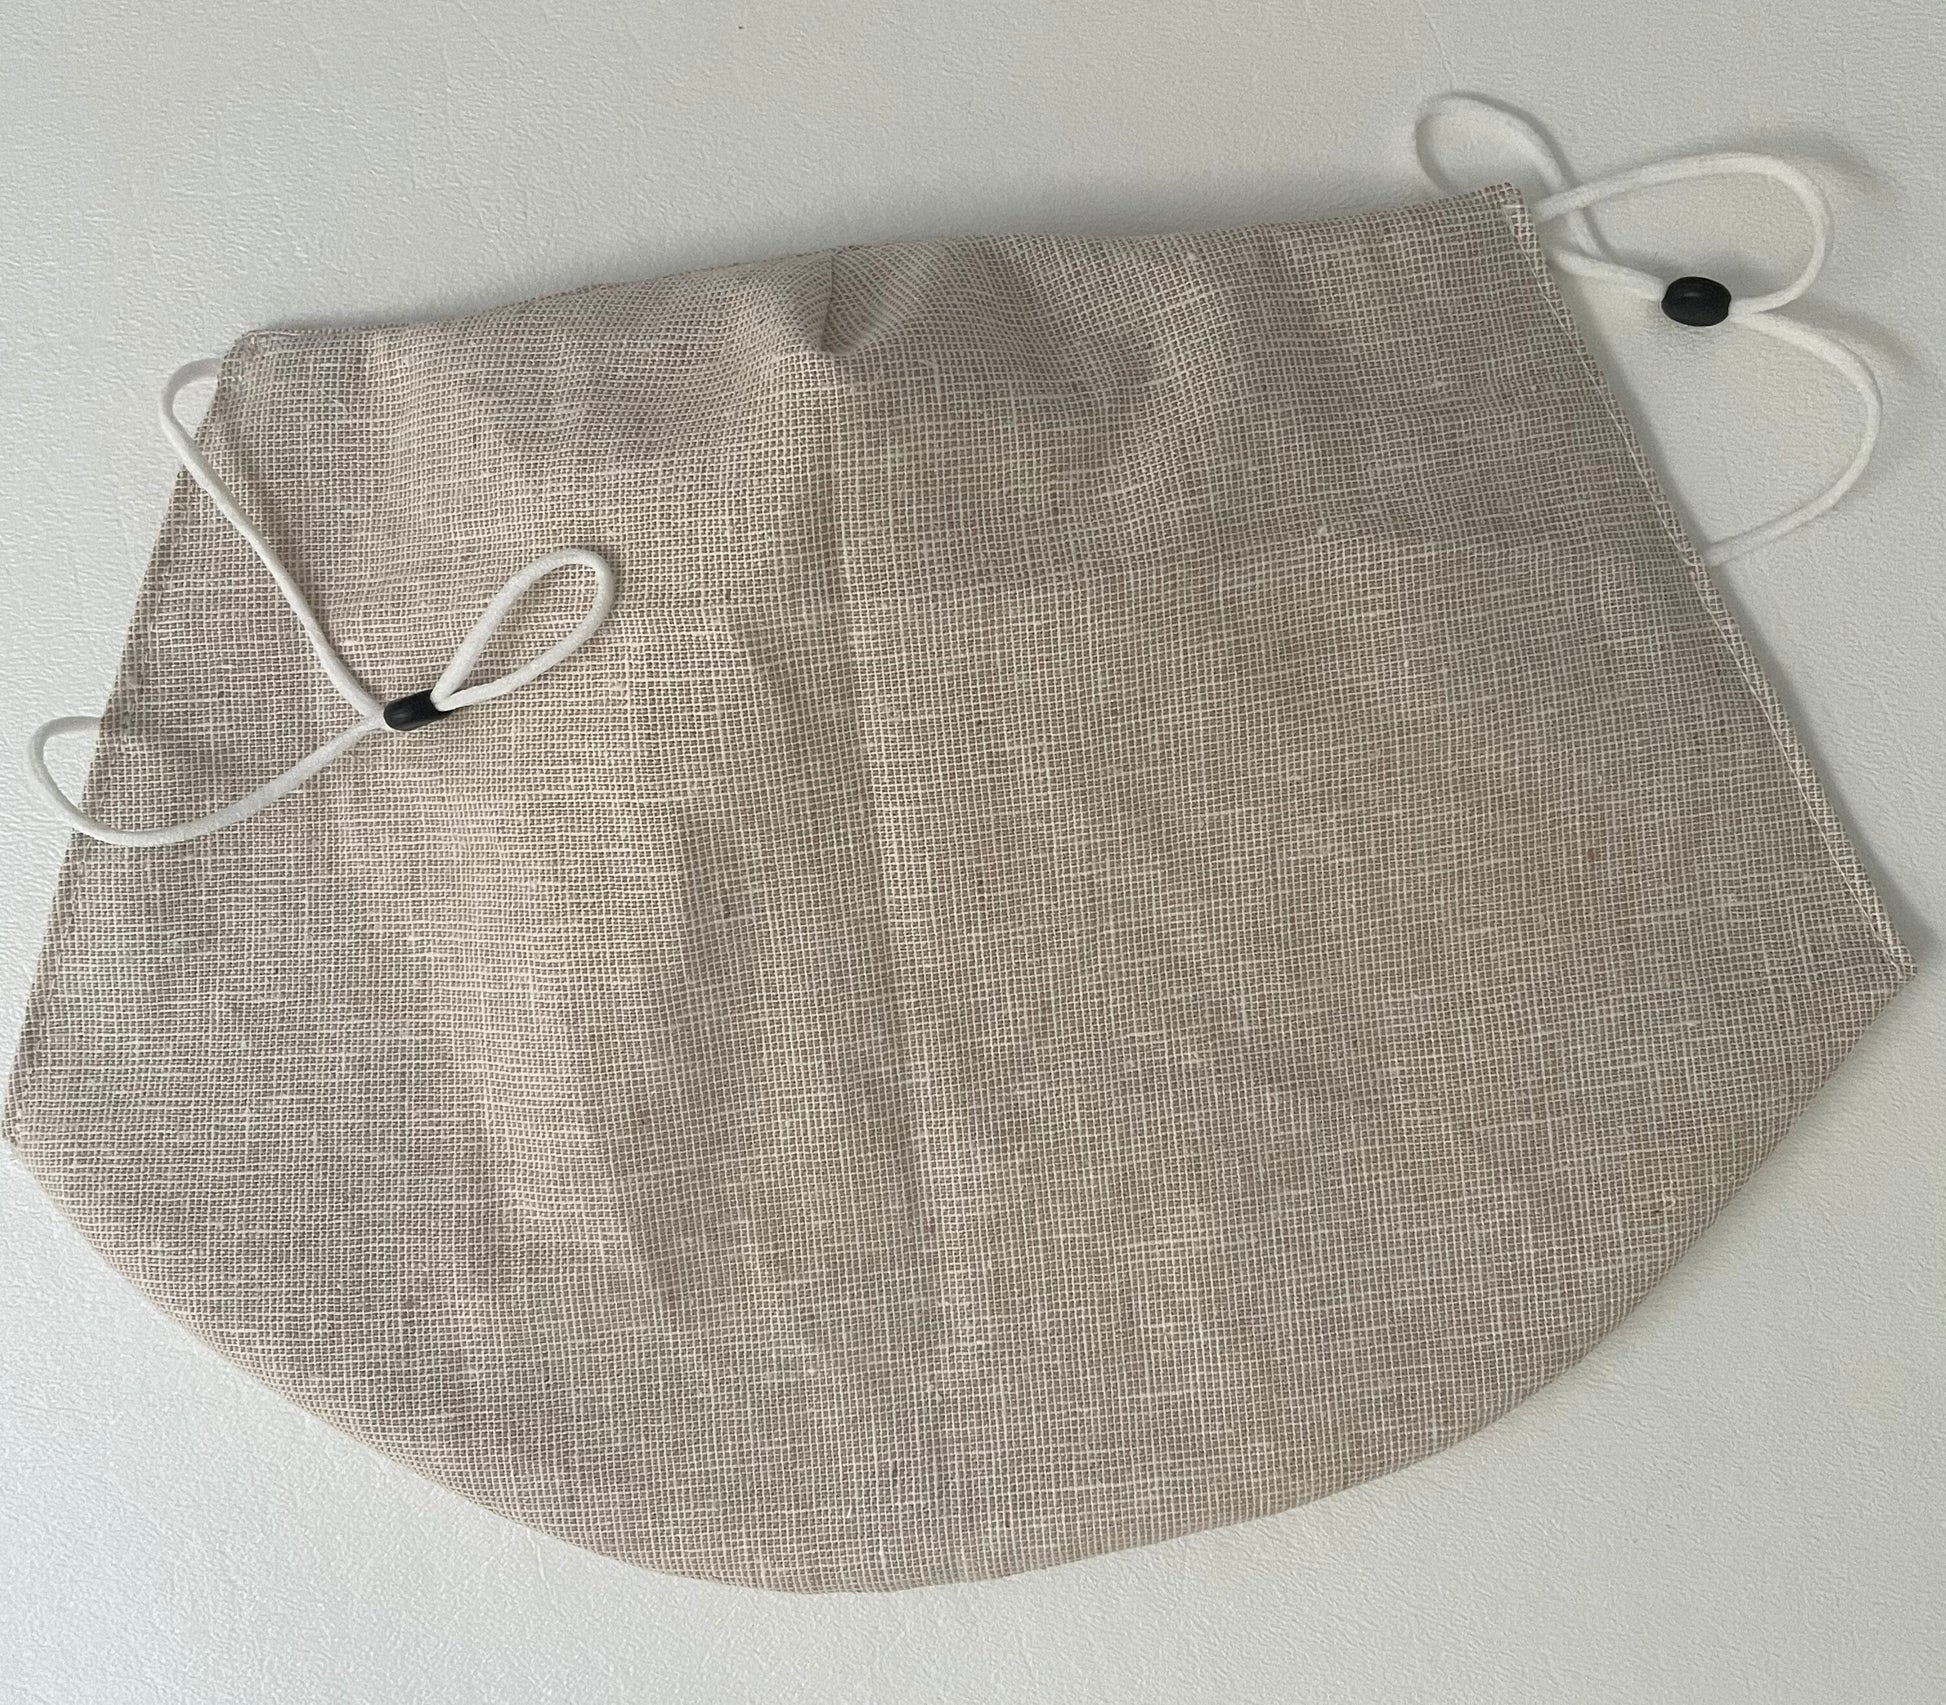 Linen Open Bottom Veil Mask, A cool, comfortable and breathable face mask. Washable. With sewn in filter. Made in USA